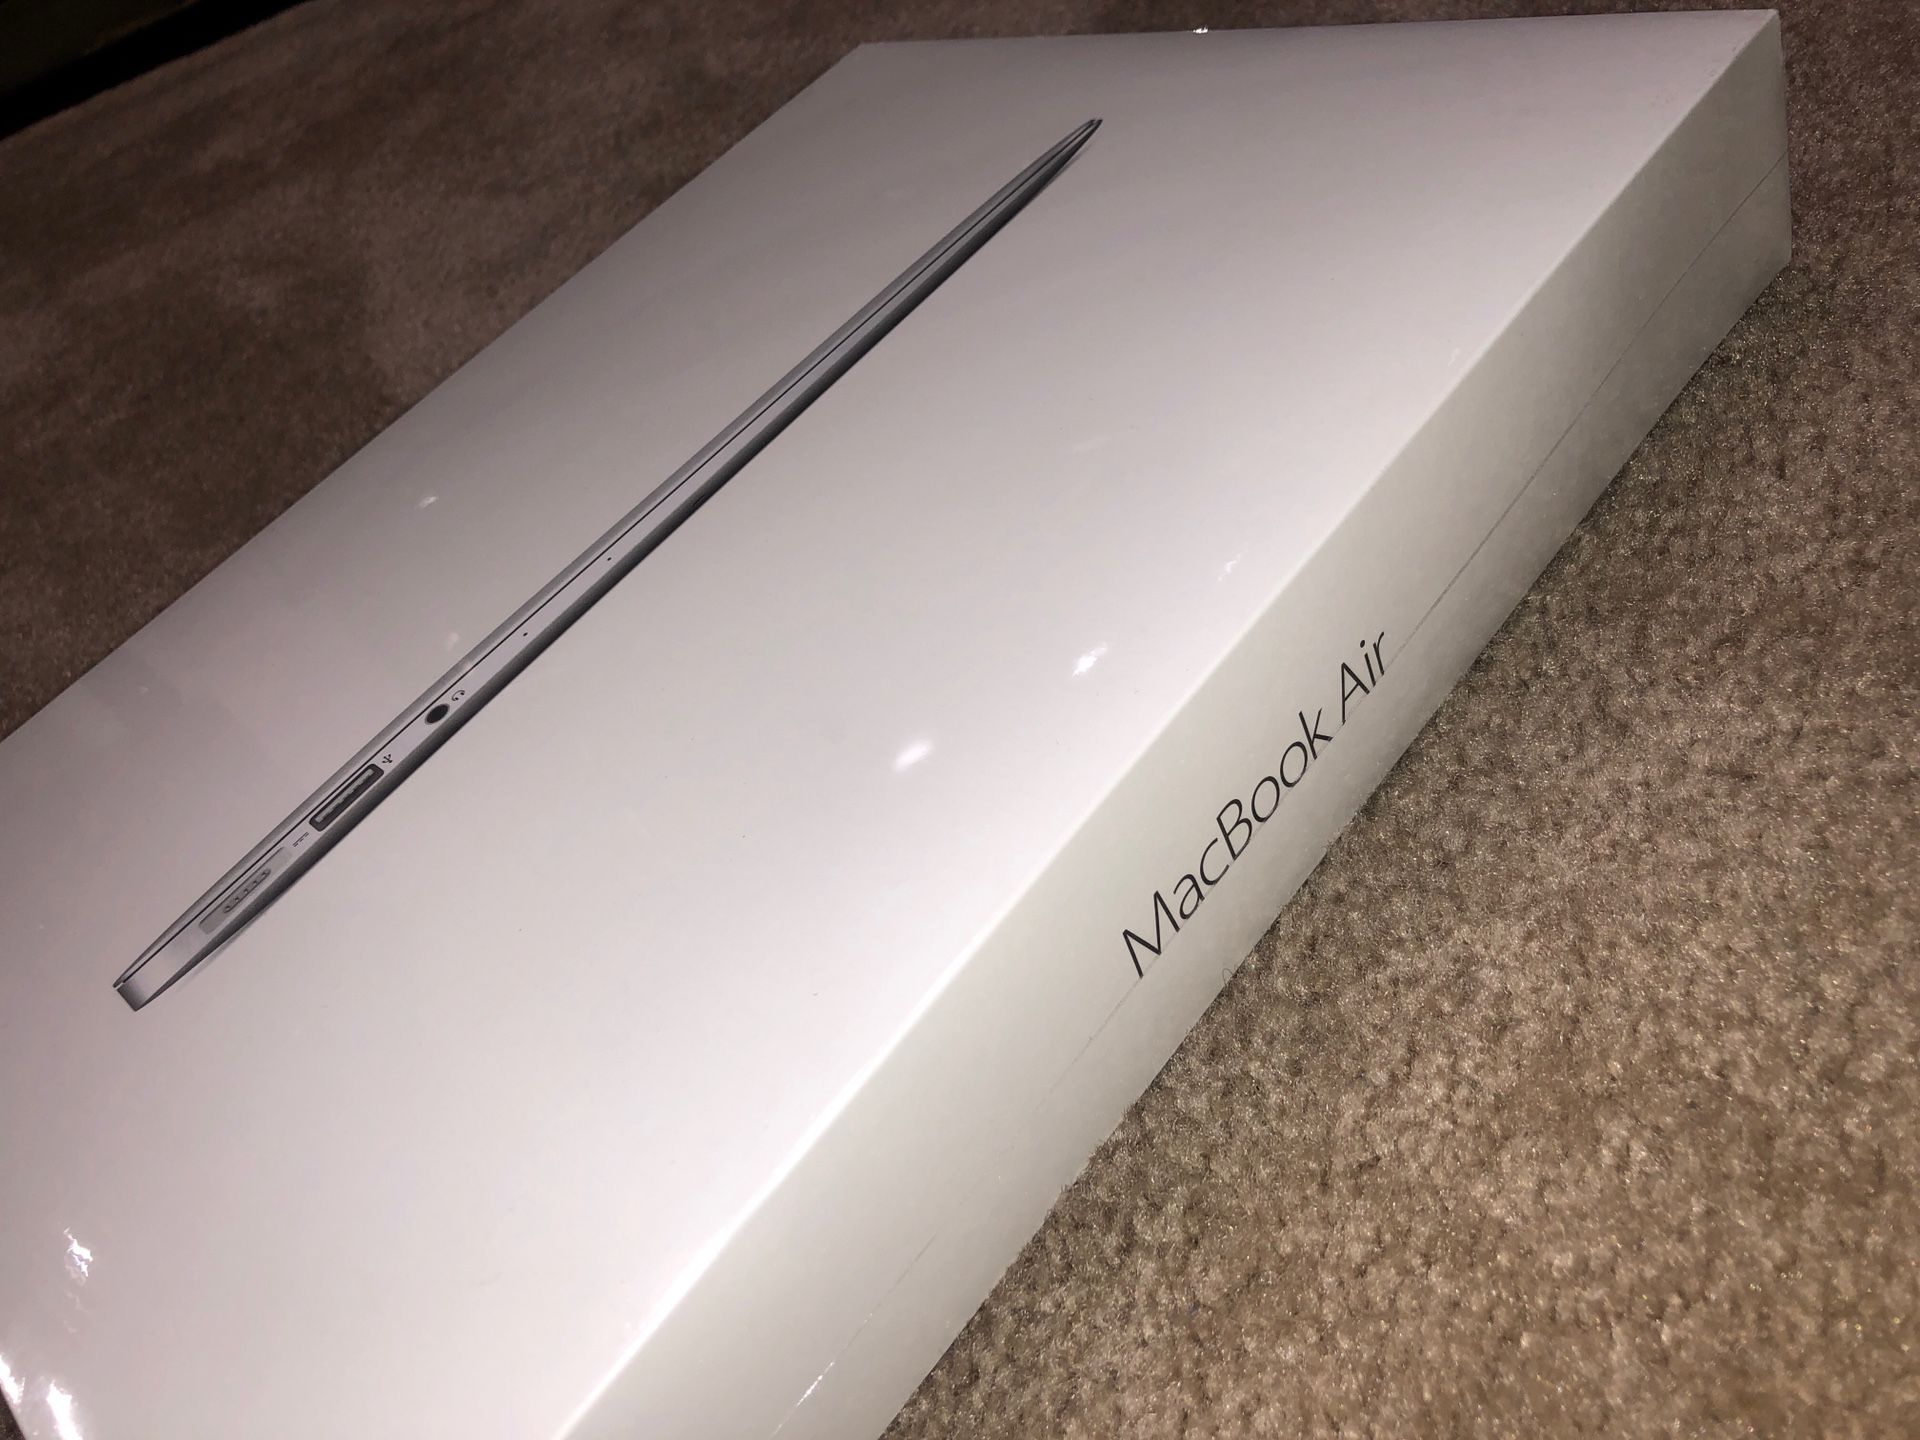 2017 Brand New 13” Apple MacBook Air NEVER USED STILL IN PLASTIC !